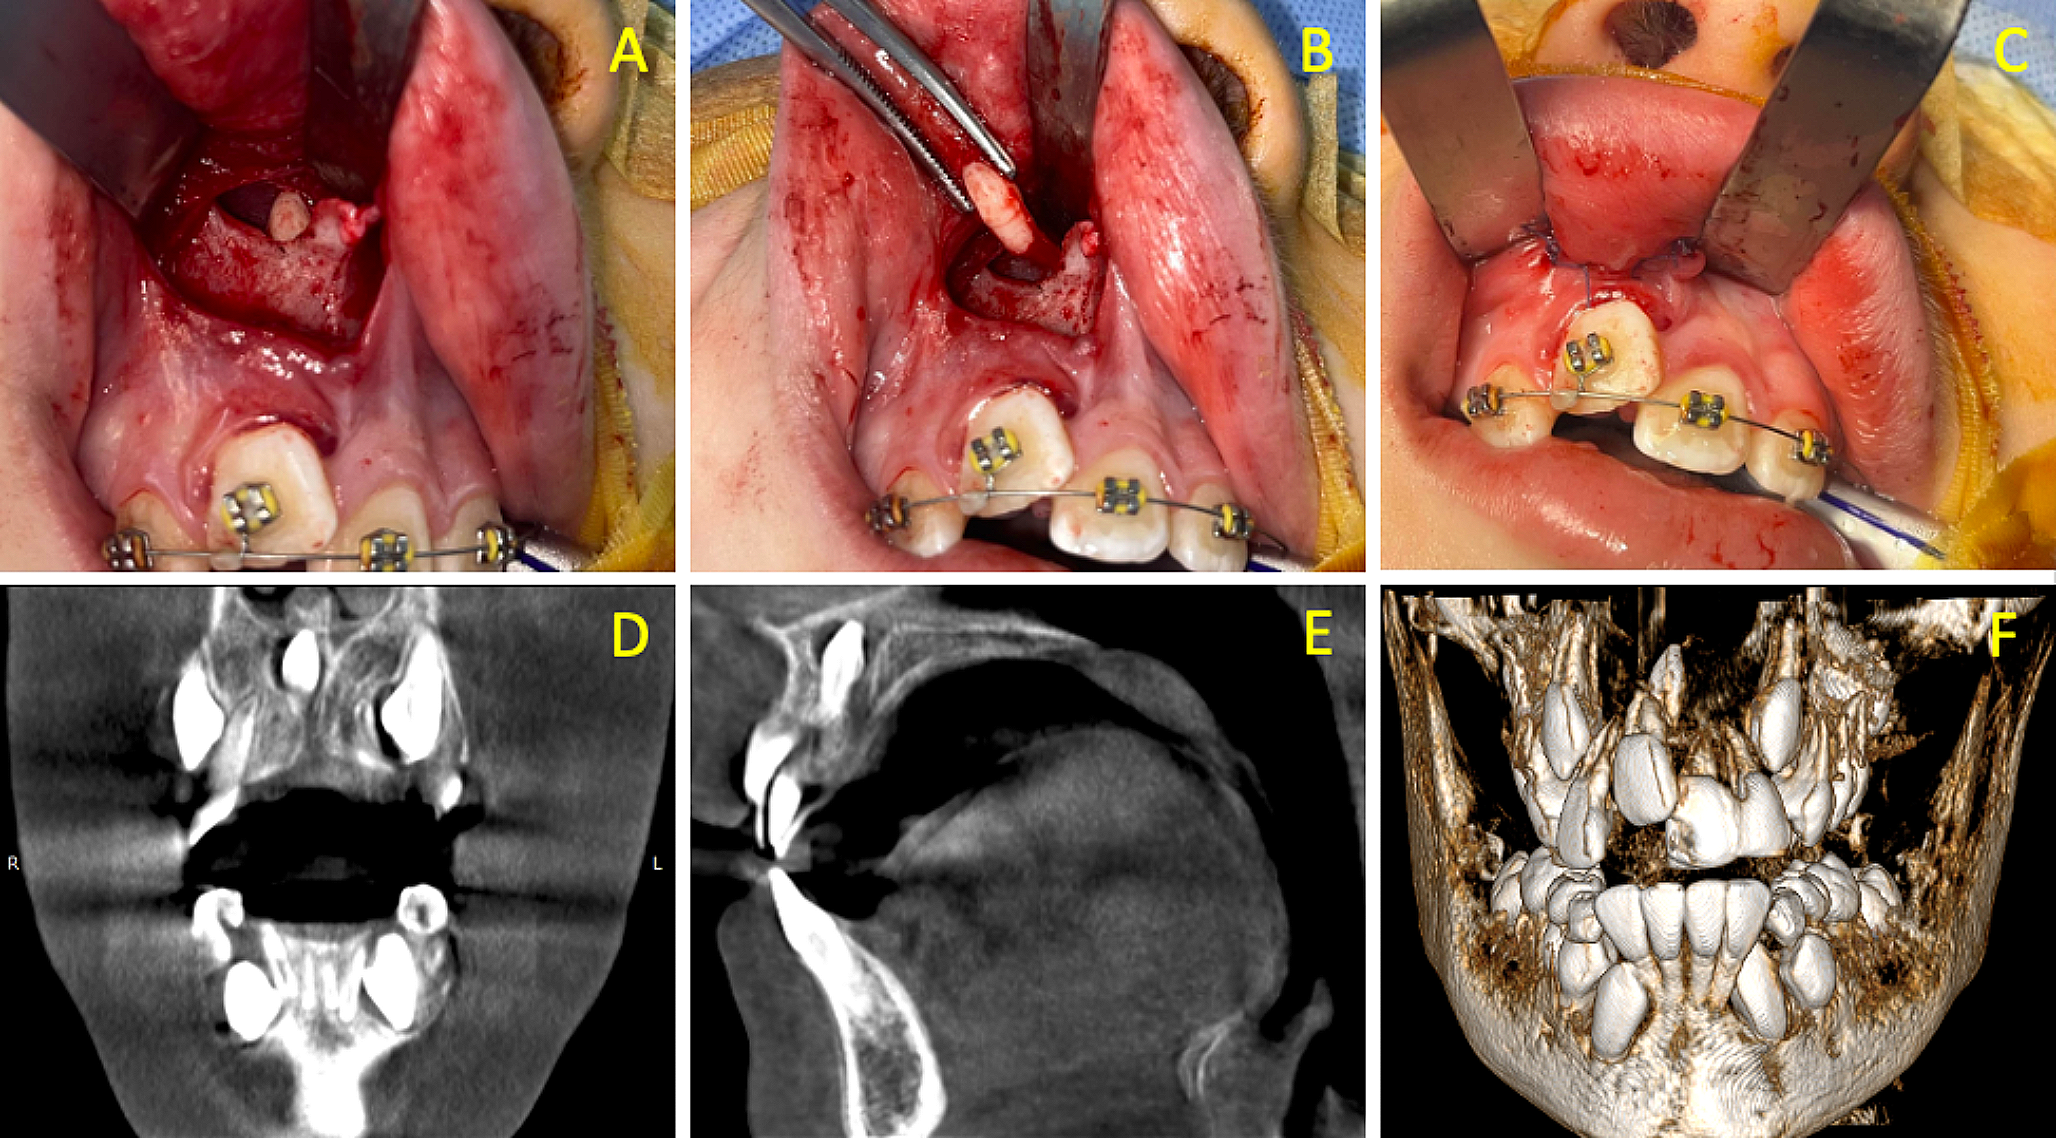 Minimally invasive intraoral removal of mesiodens via a transnasal, non-endoscopic approach: a systematic review on the purpose of 10 cases